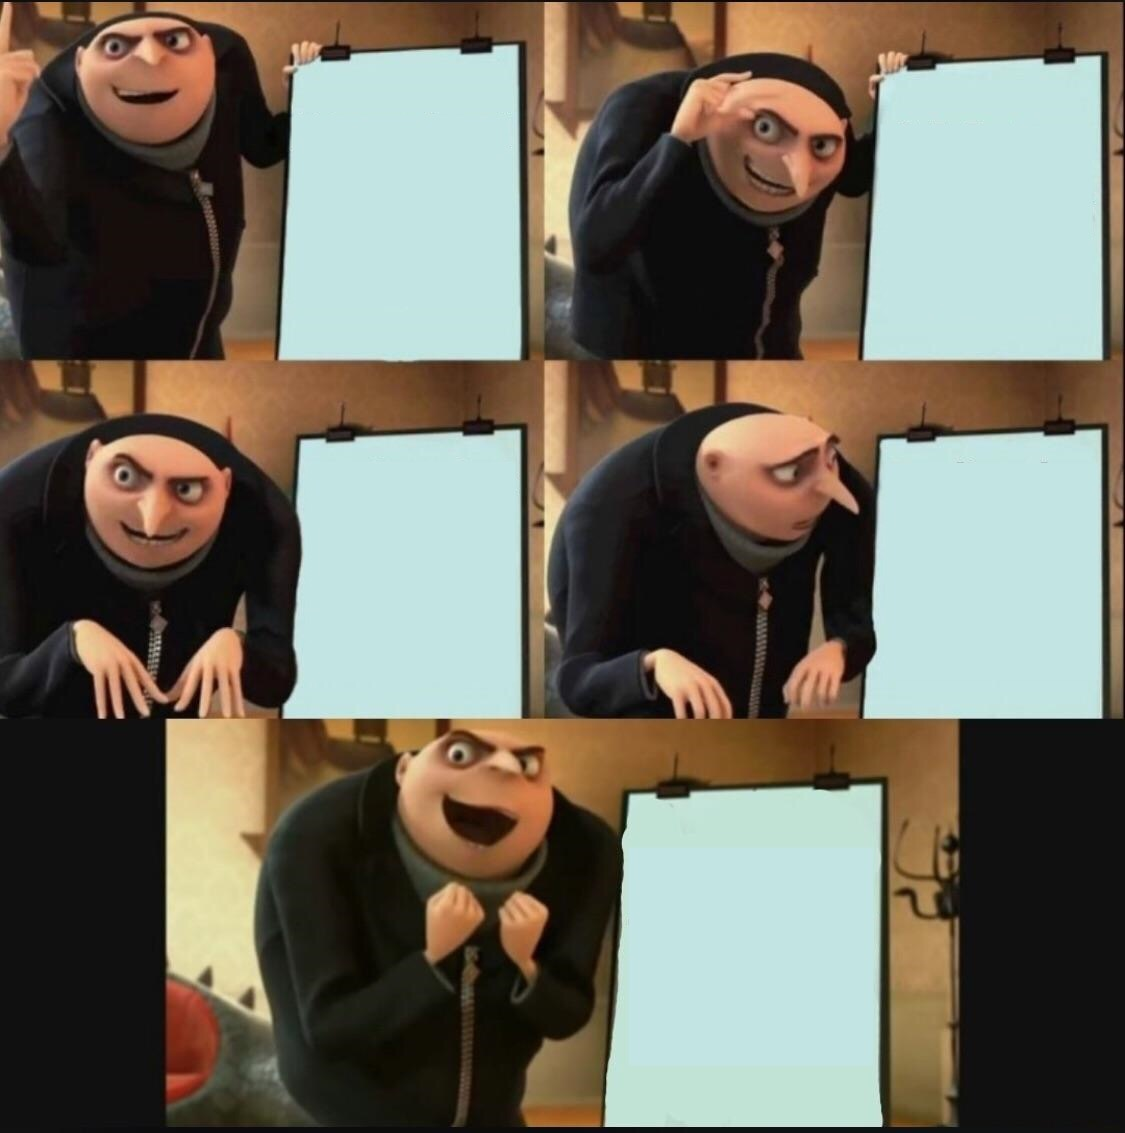 gru meme template but with holmes by Katsutacle on DeviantArt